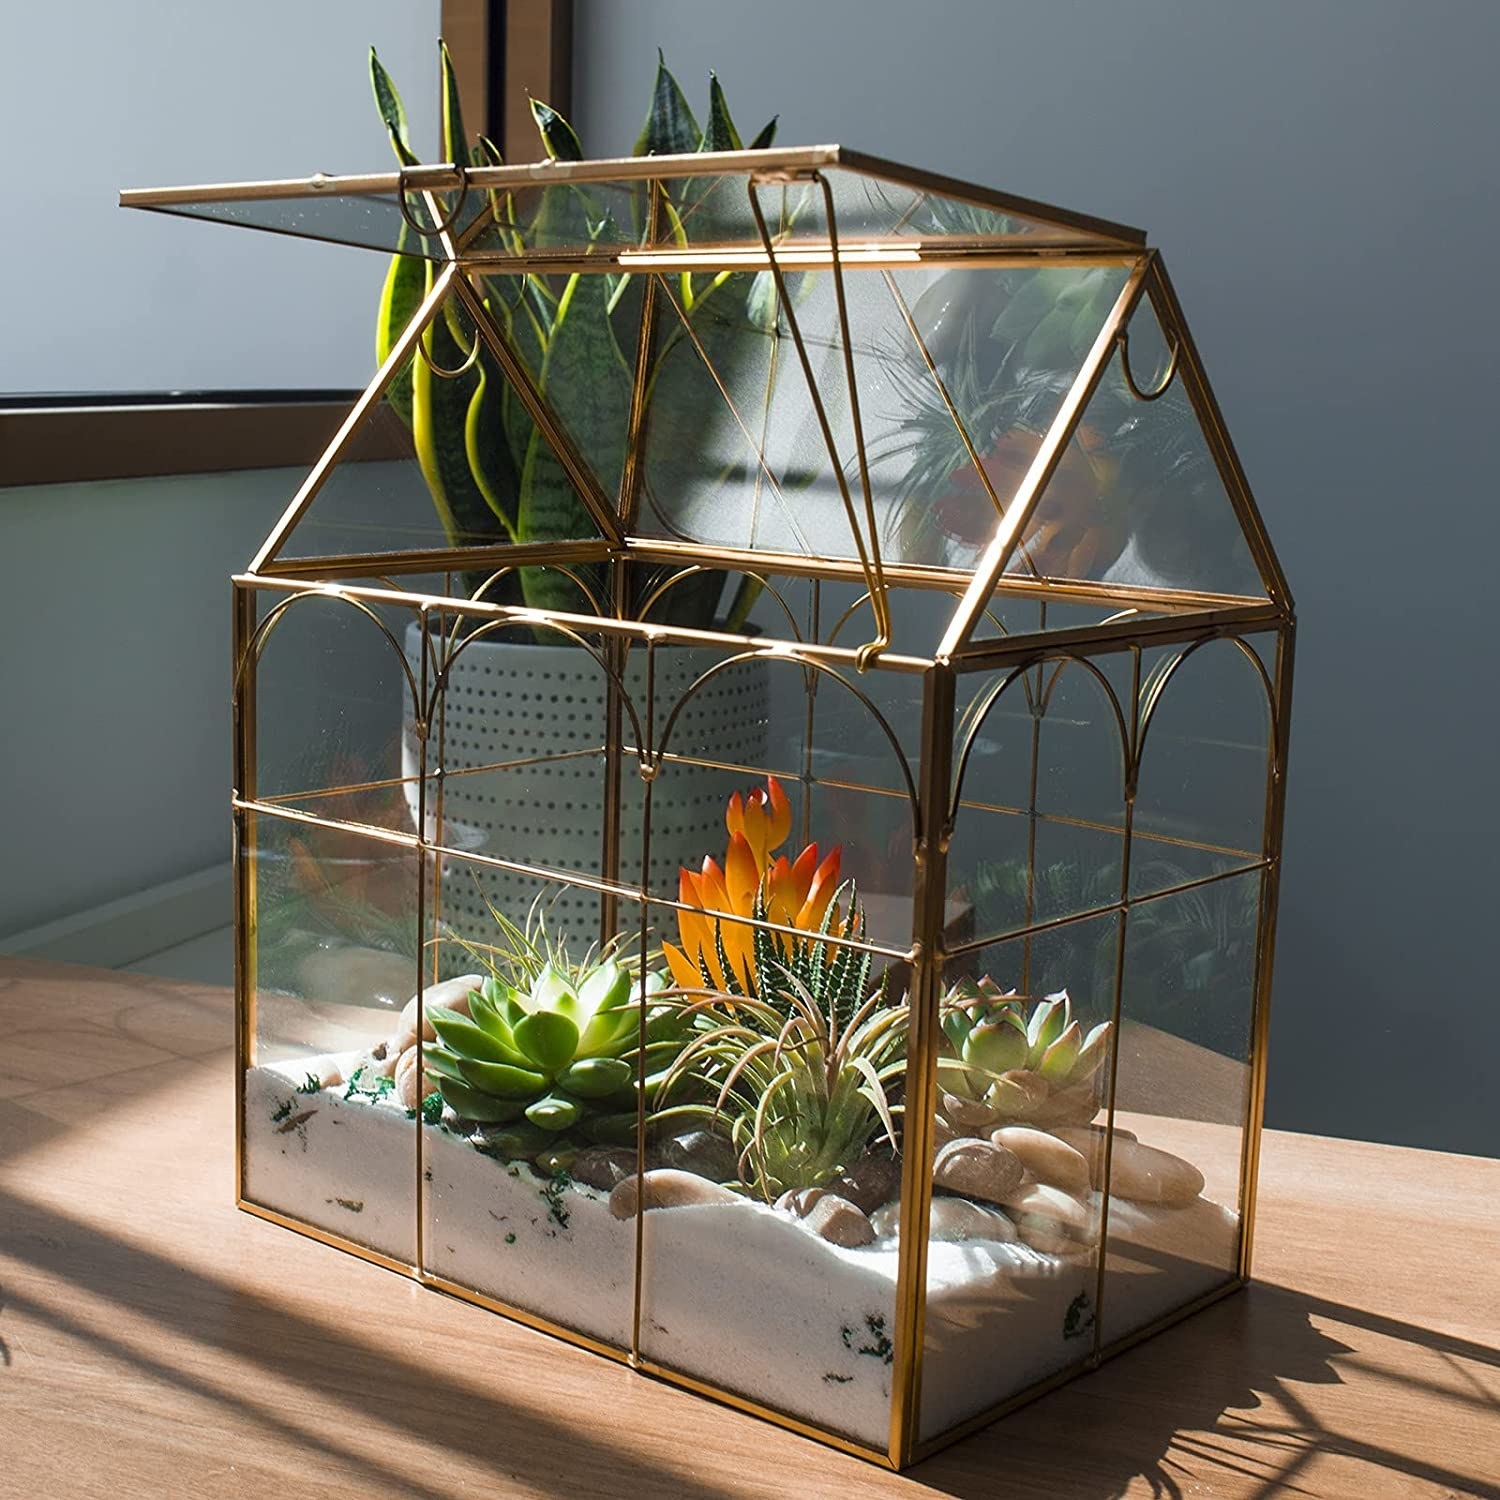 glass box shaped like a greenhouse with a hinged lid on the roof